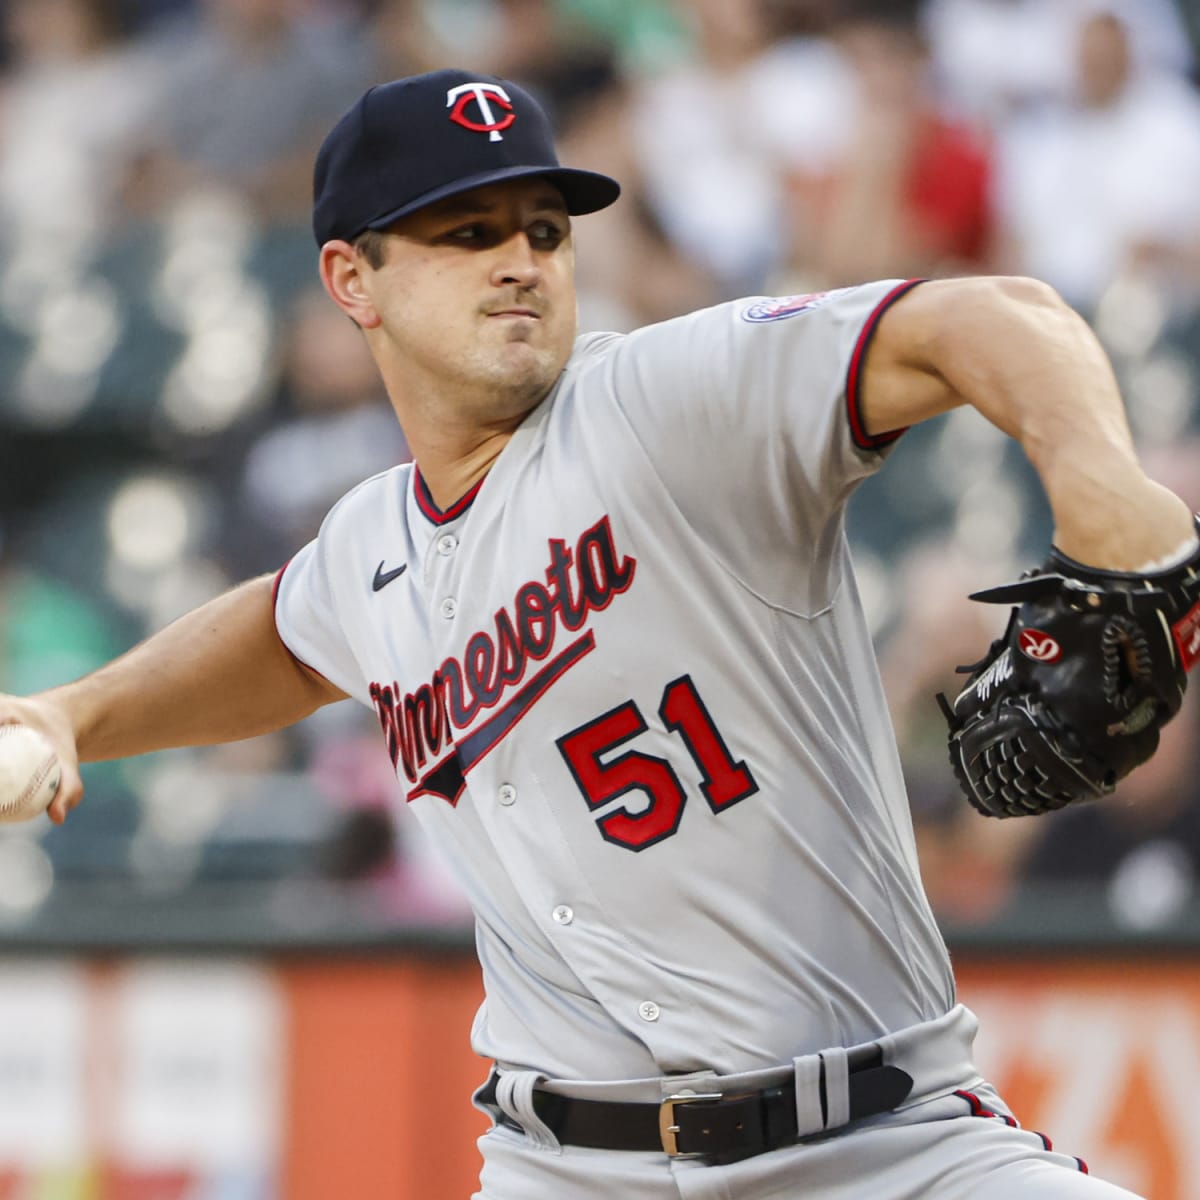 Chris Paddack injury update: Twins pitcher returns to majors after